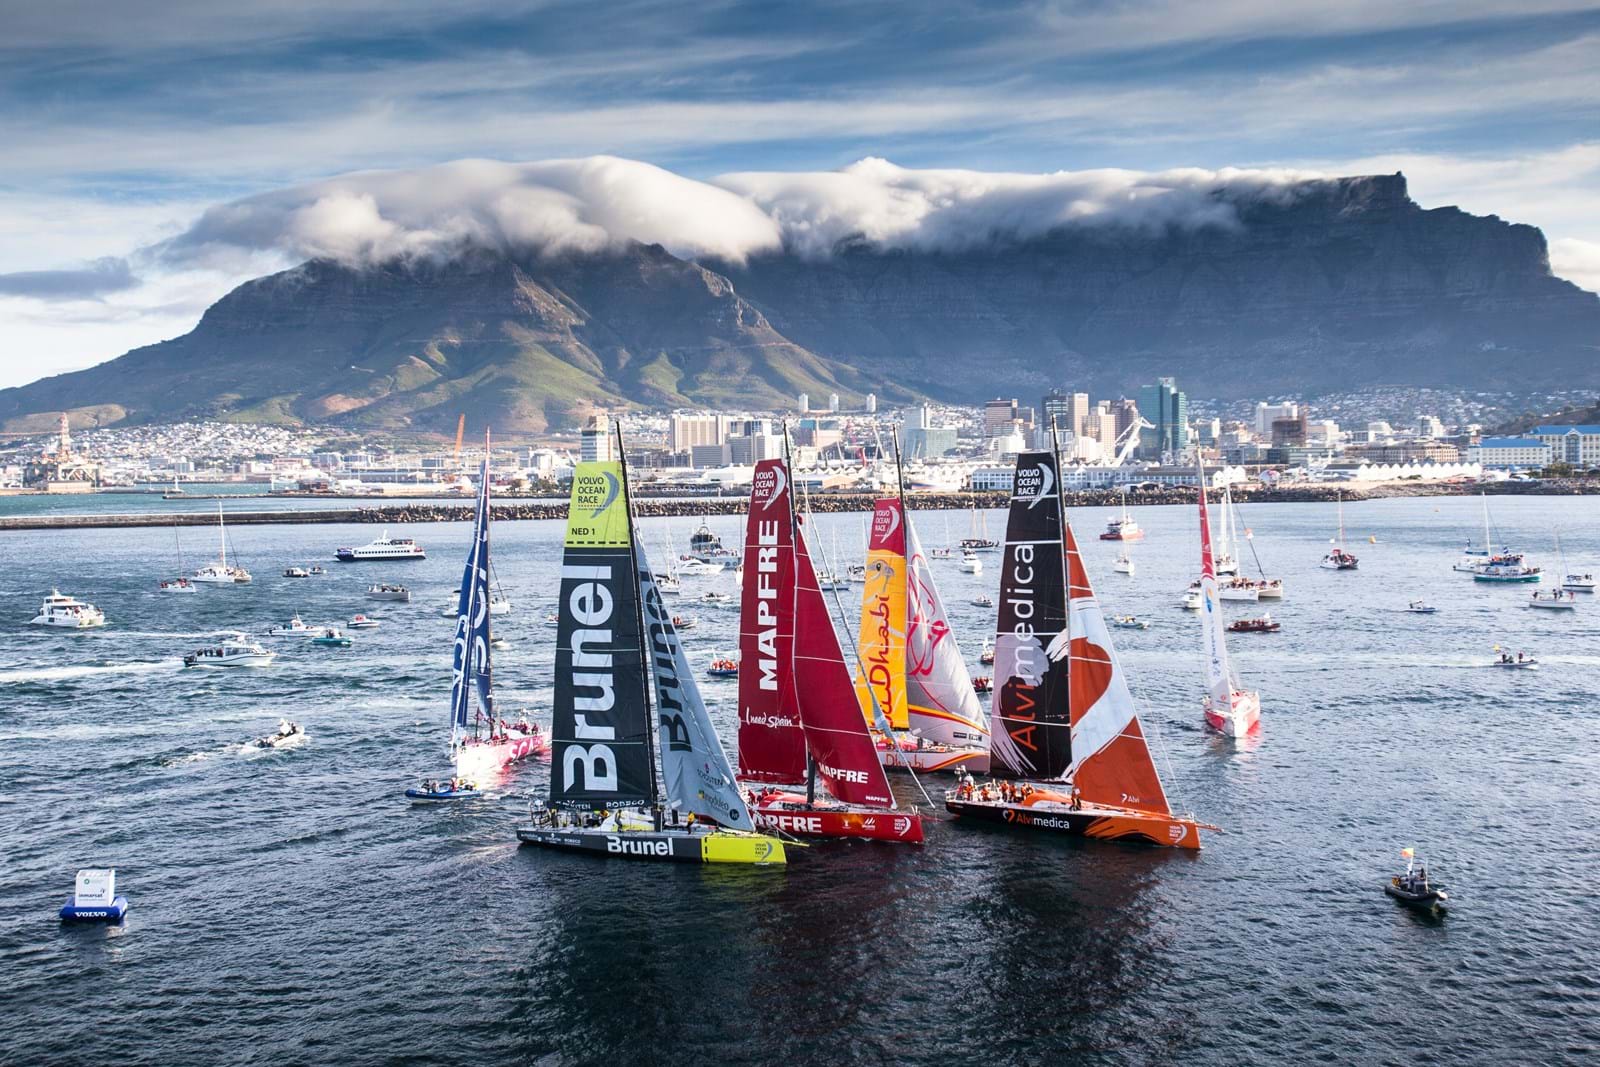 SUNSET+VINE AND VOLVO OCEAN RACE ANNOUNCE RACE BROADCAST PARTNERS